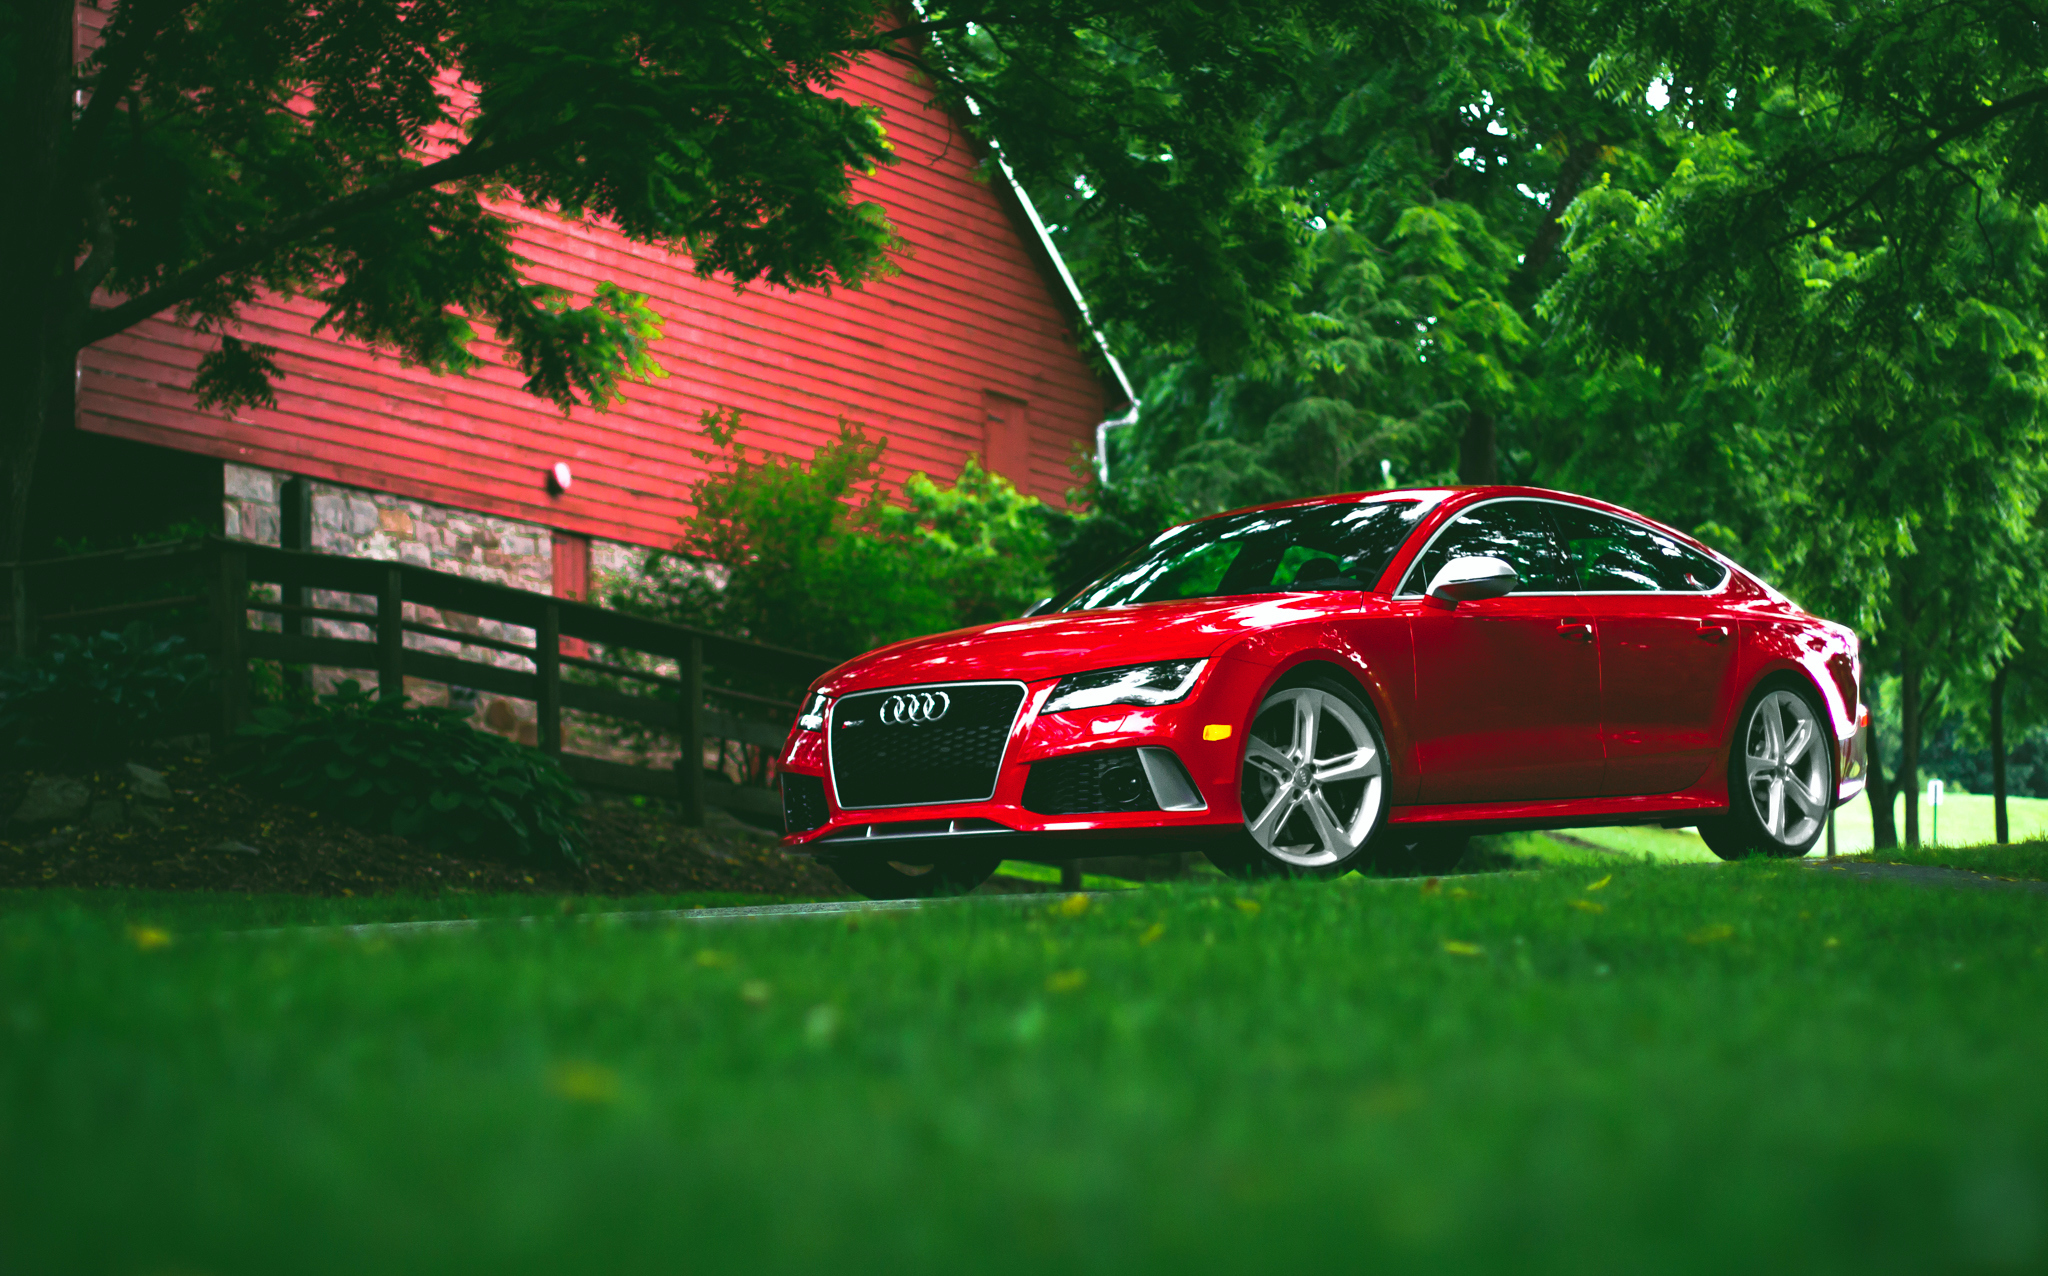 side view, audi, red, grass, cars, rs7 Full HD